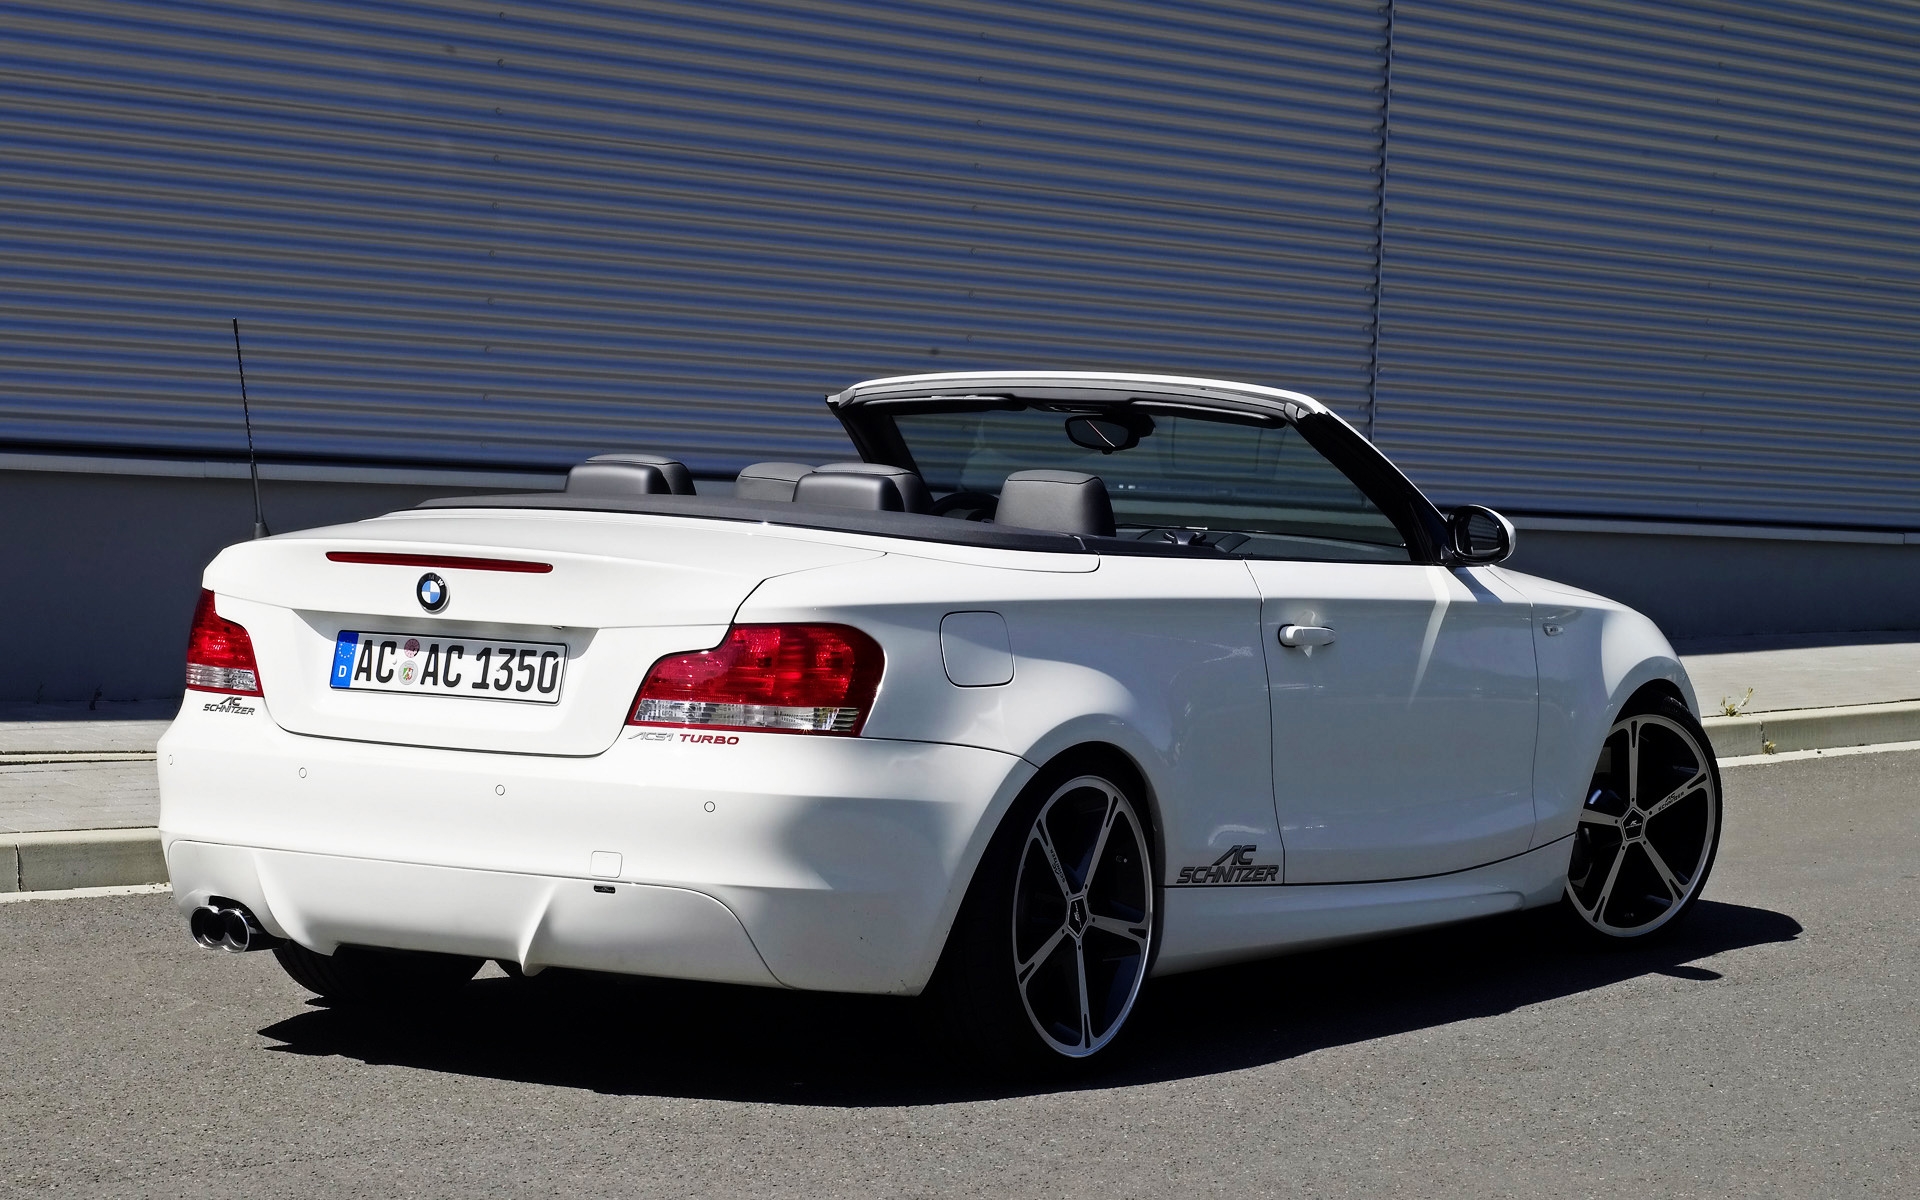 BMW 1 Series Convertible Rear Angle for 1920 x 1200 widescreen resolution